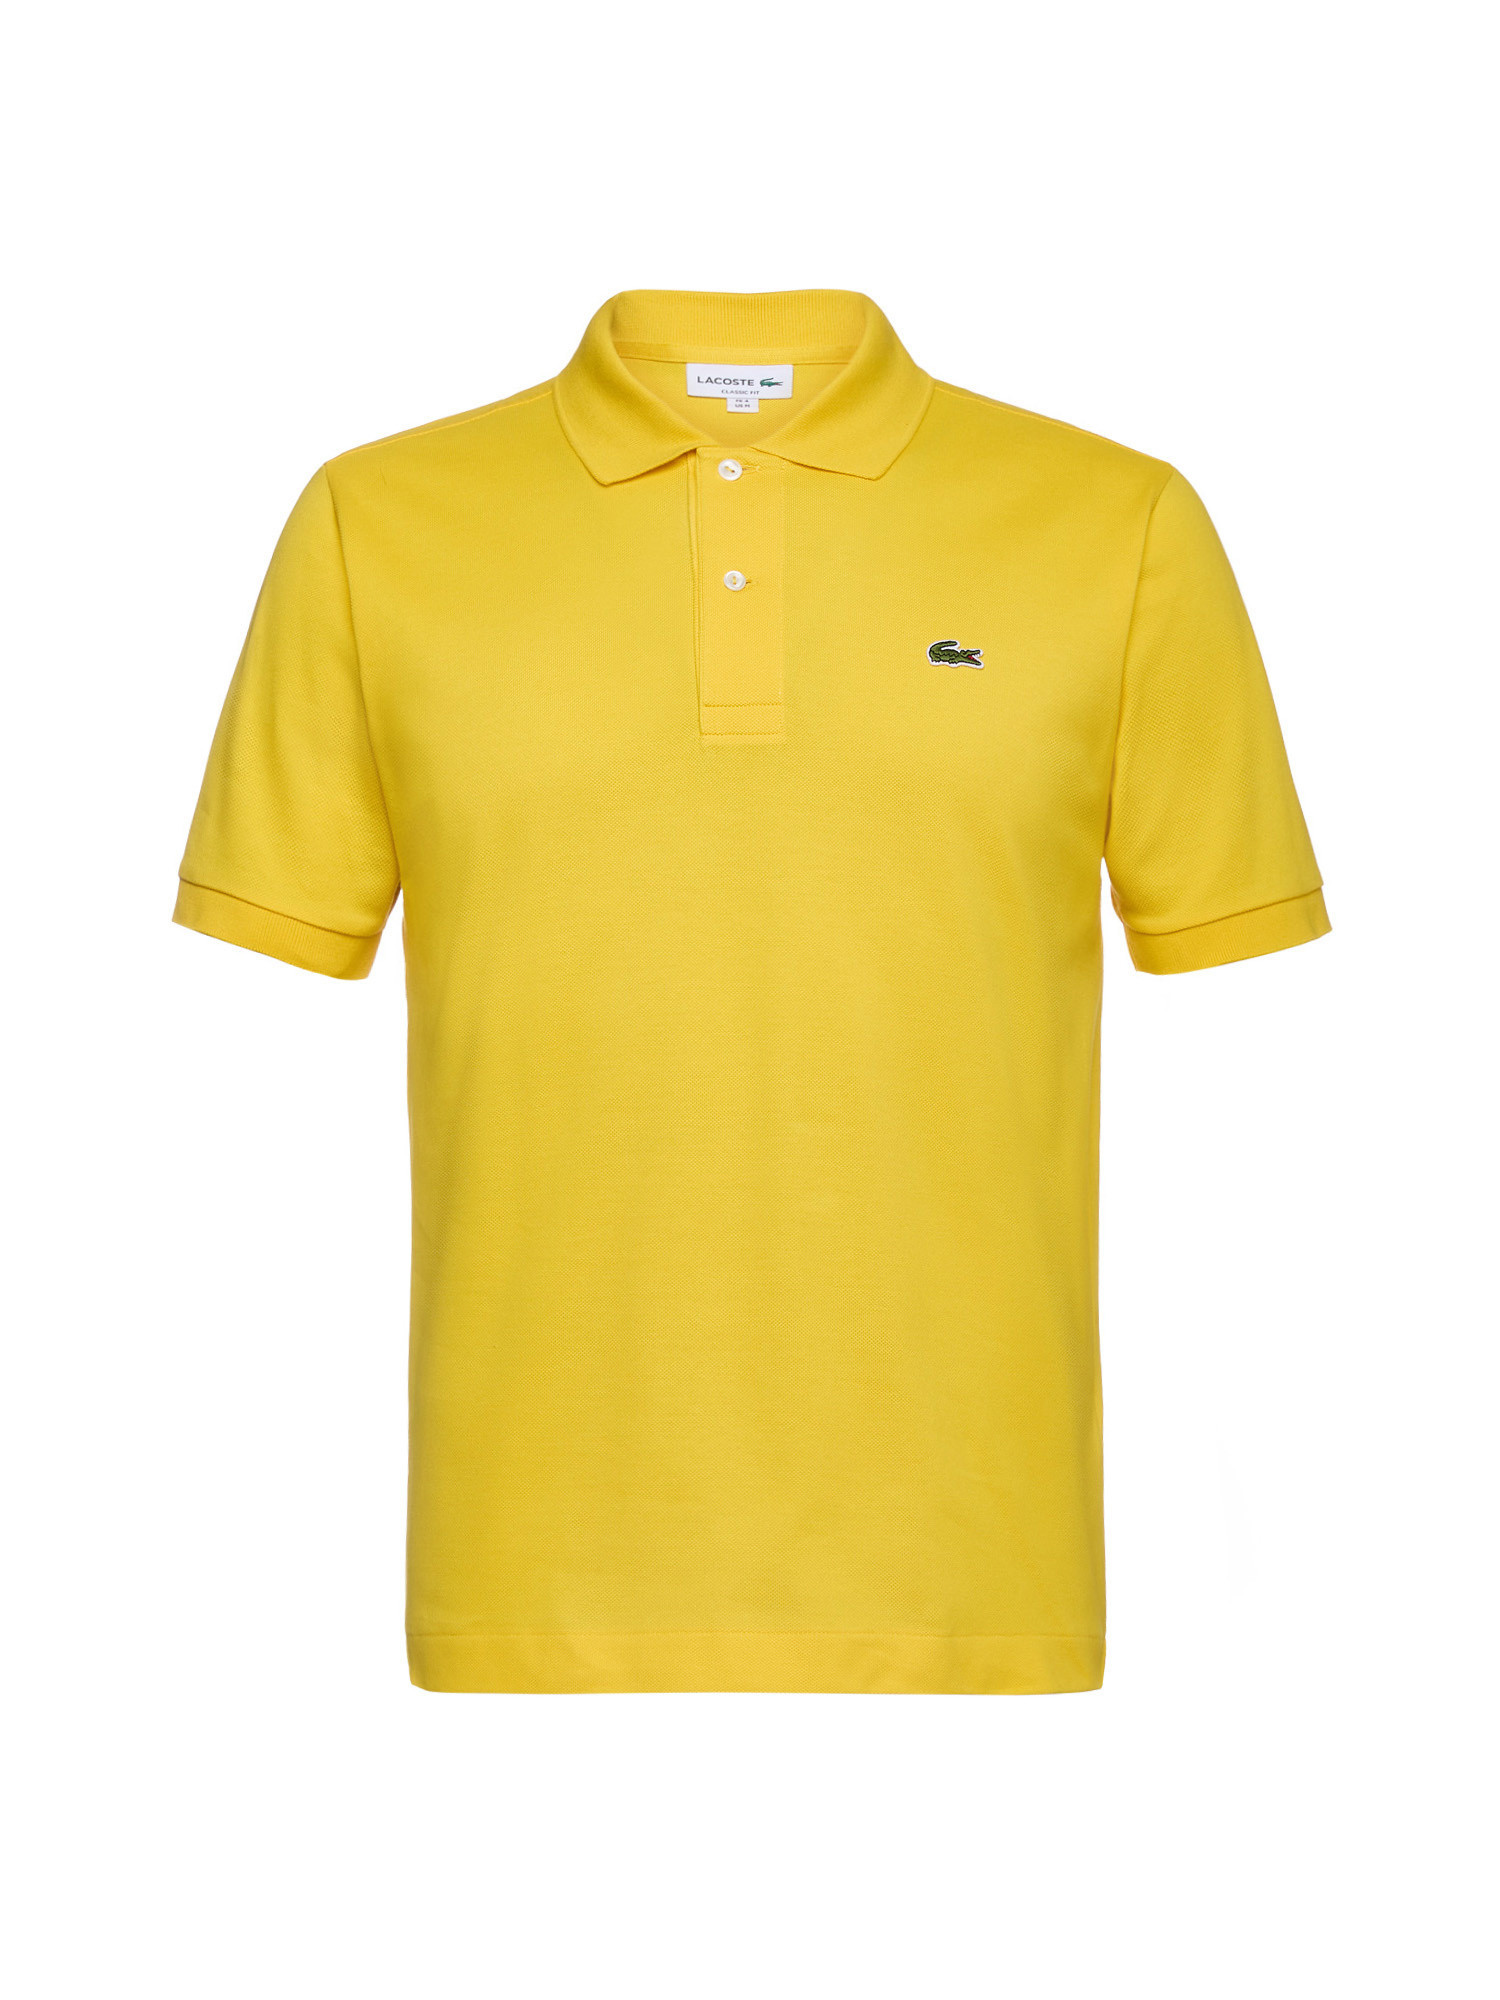 Lacoste - Classic cut polo shirt in petit piquè cotton, Yellow, large image number 0